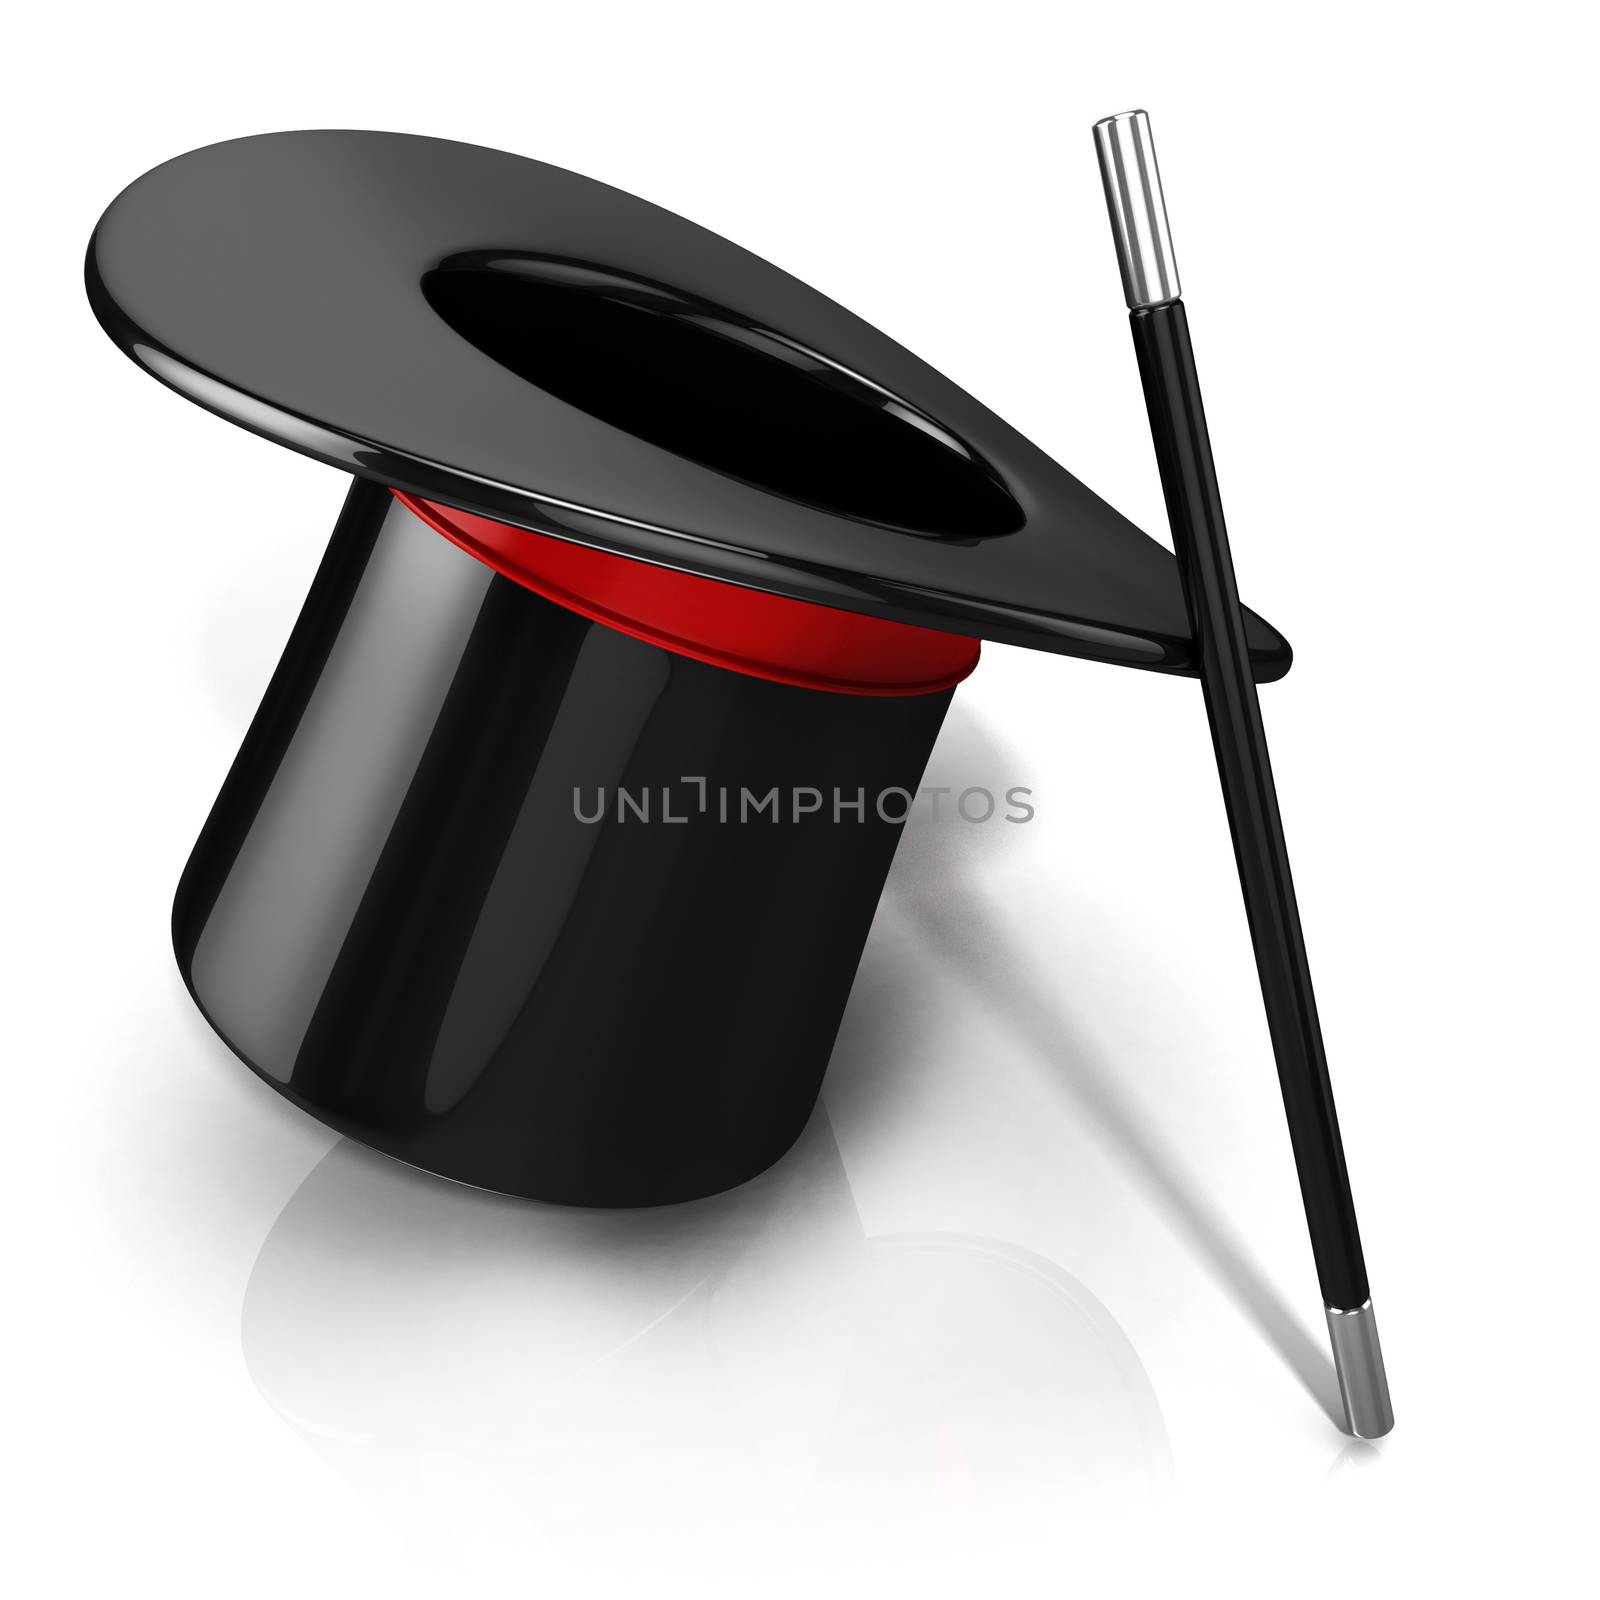 Magic hat and wand, 3D render isolated on white background. Side view